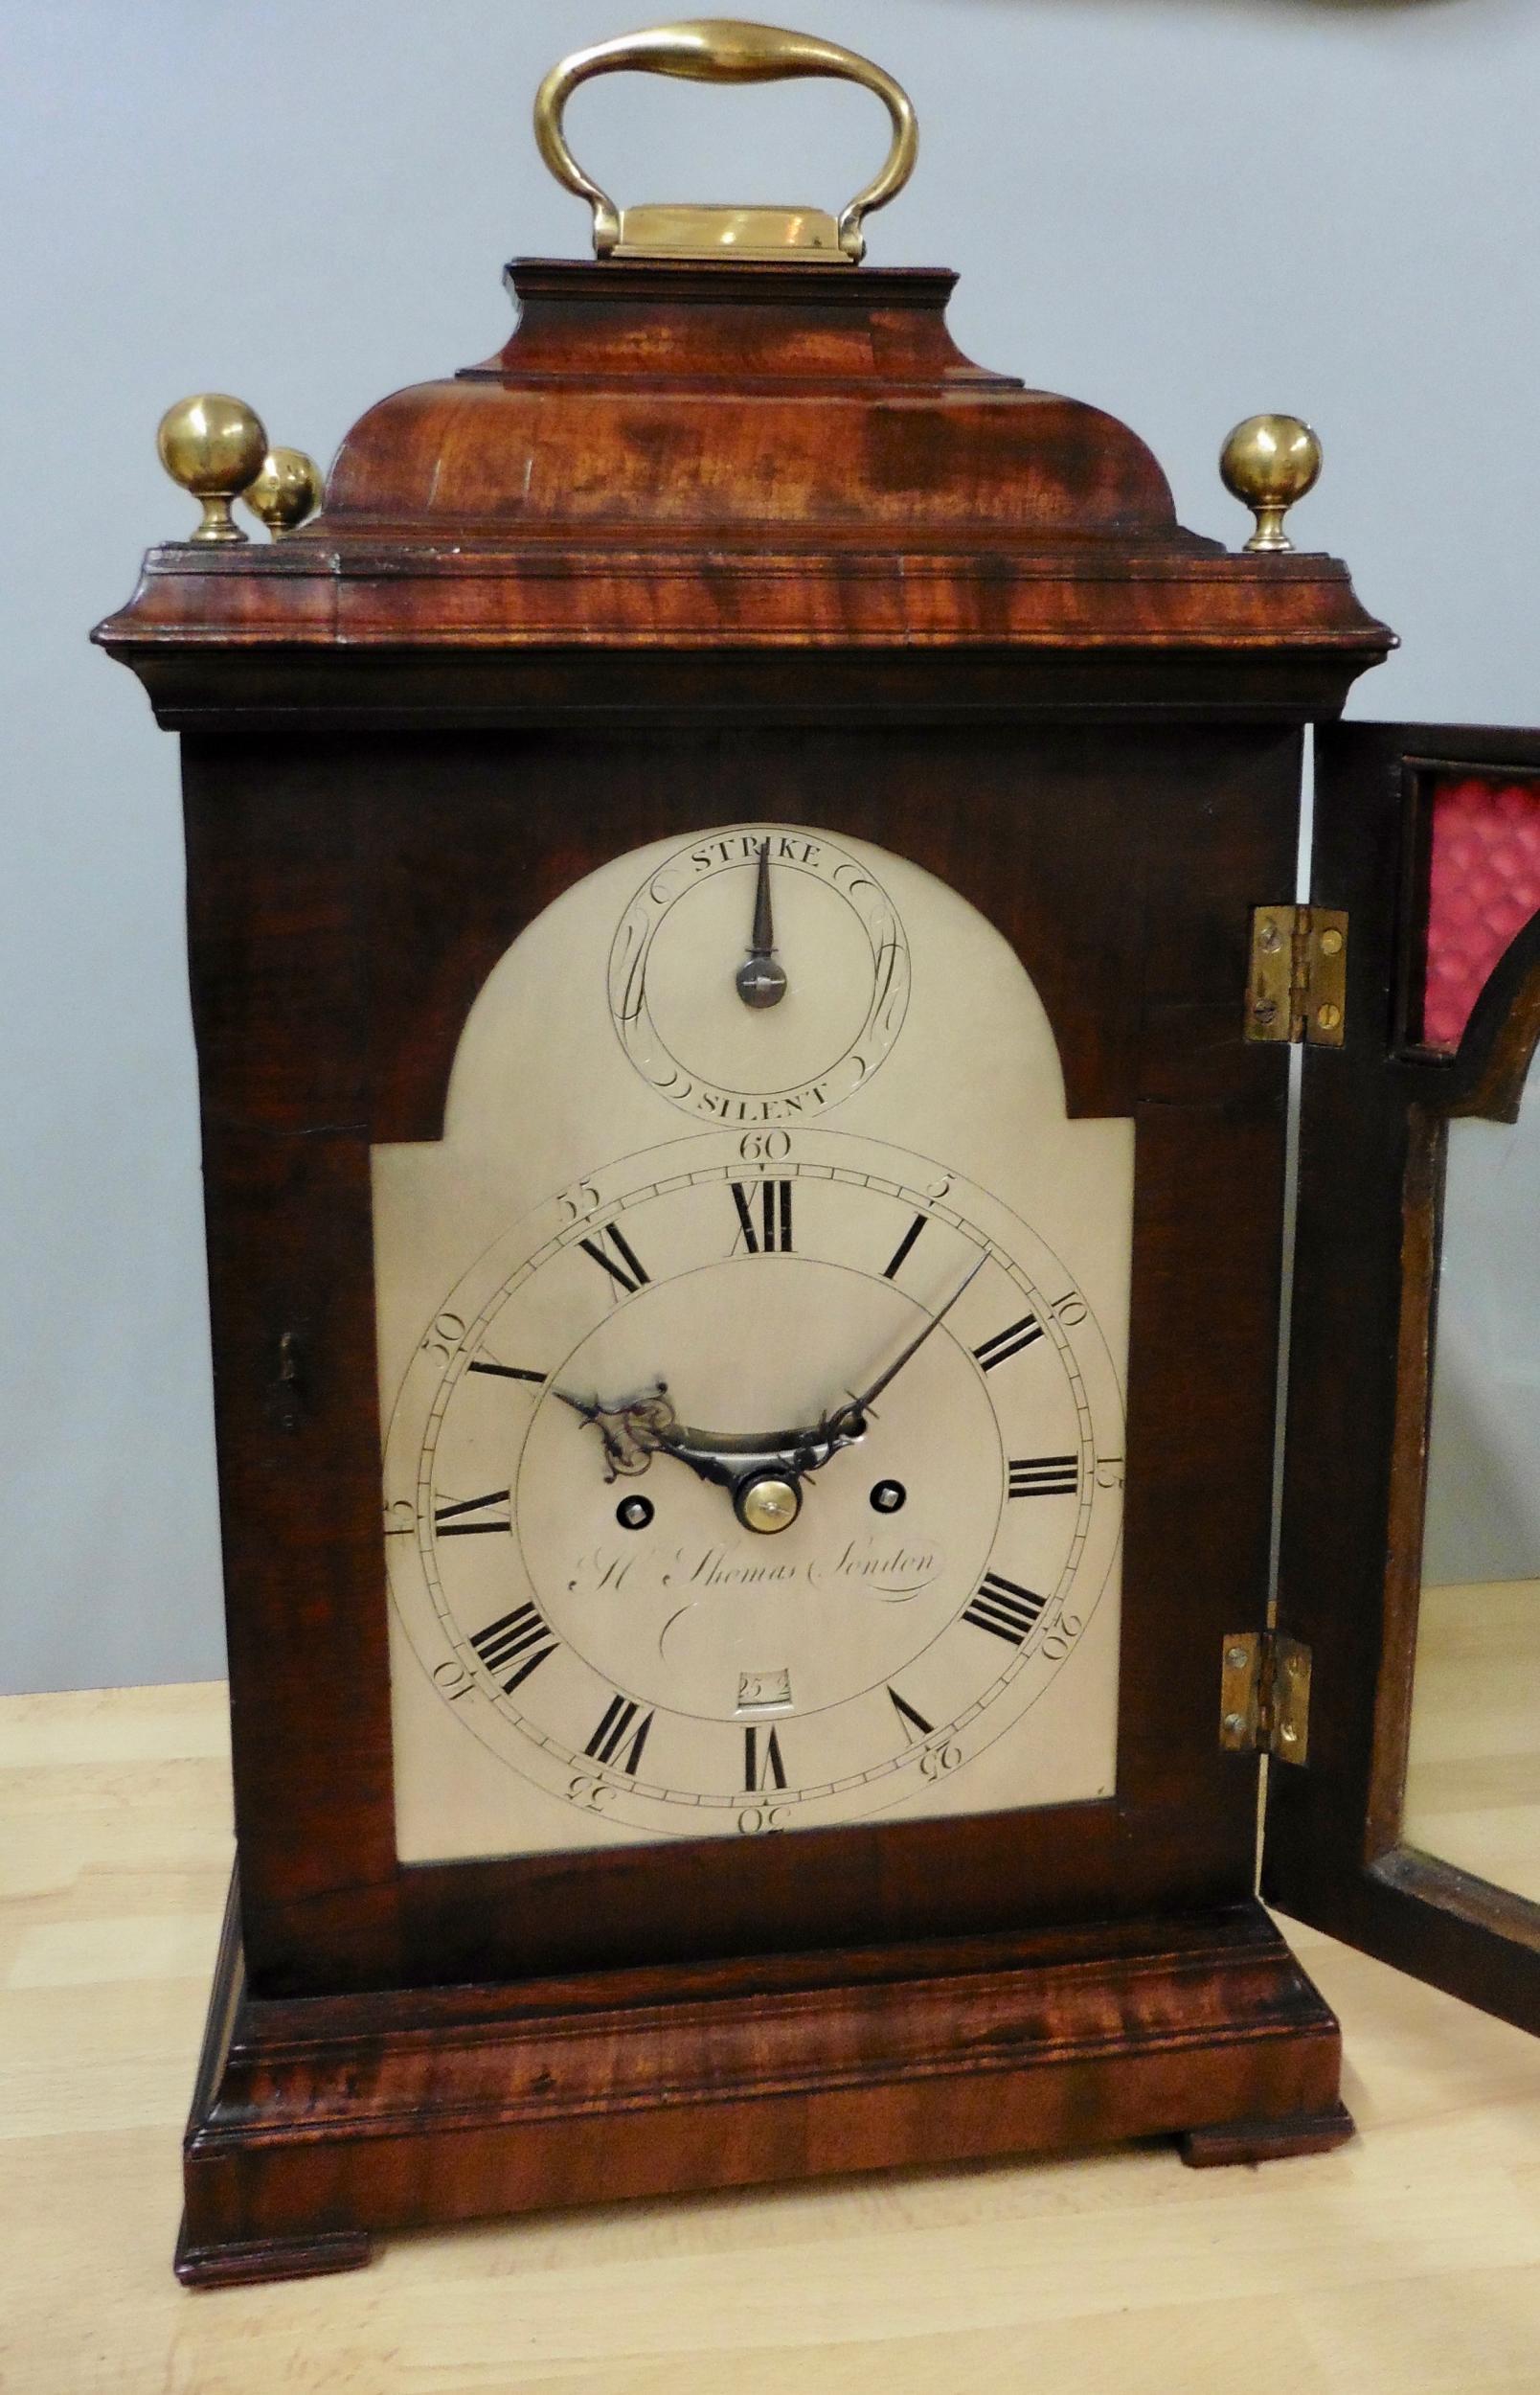 George III bracket clock by H.Thomas, London

Mahogany bell top case surmounted with hinged carrying handle and four brass ball finials standing on a raised plinth and resting on four pad feet. Cast brass quadrant, glazed side windows and roundels